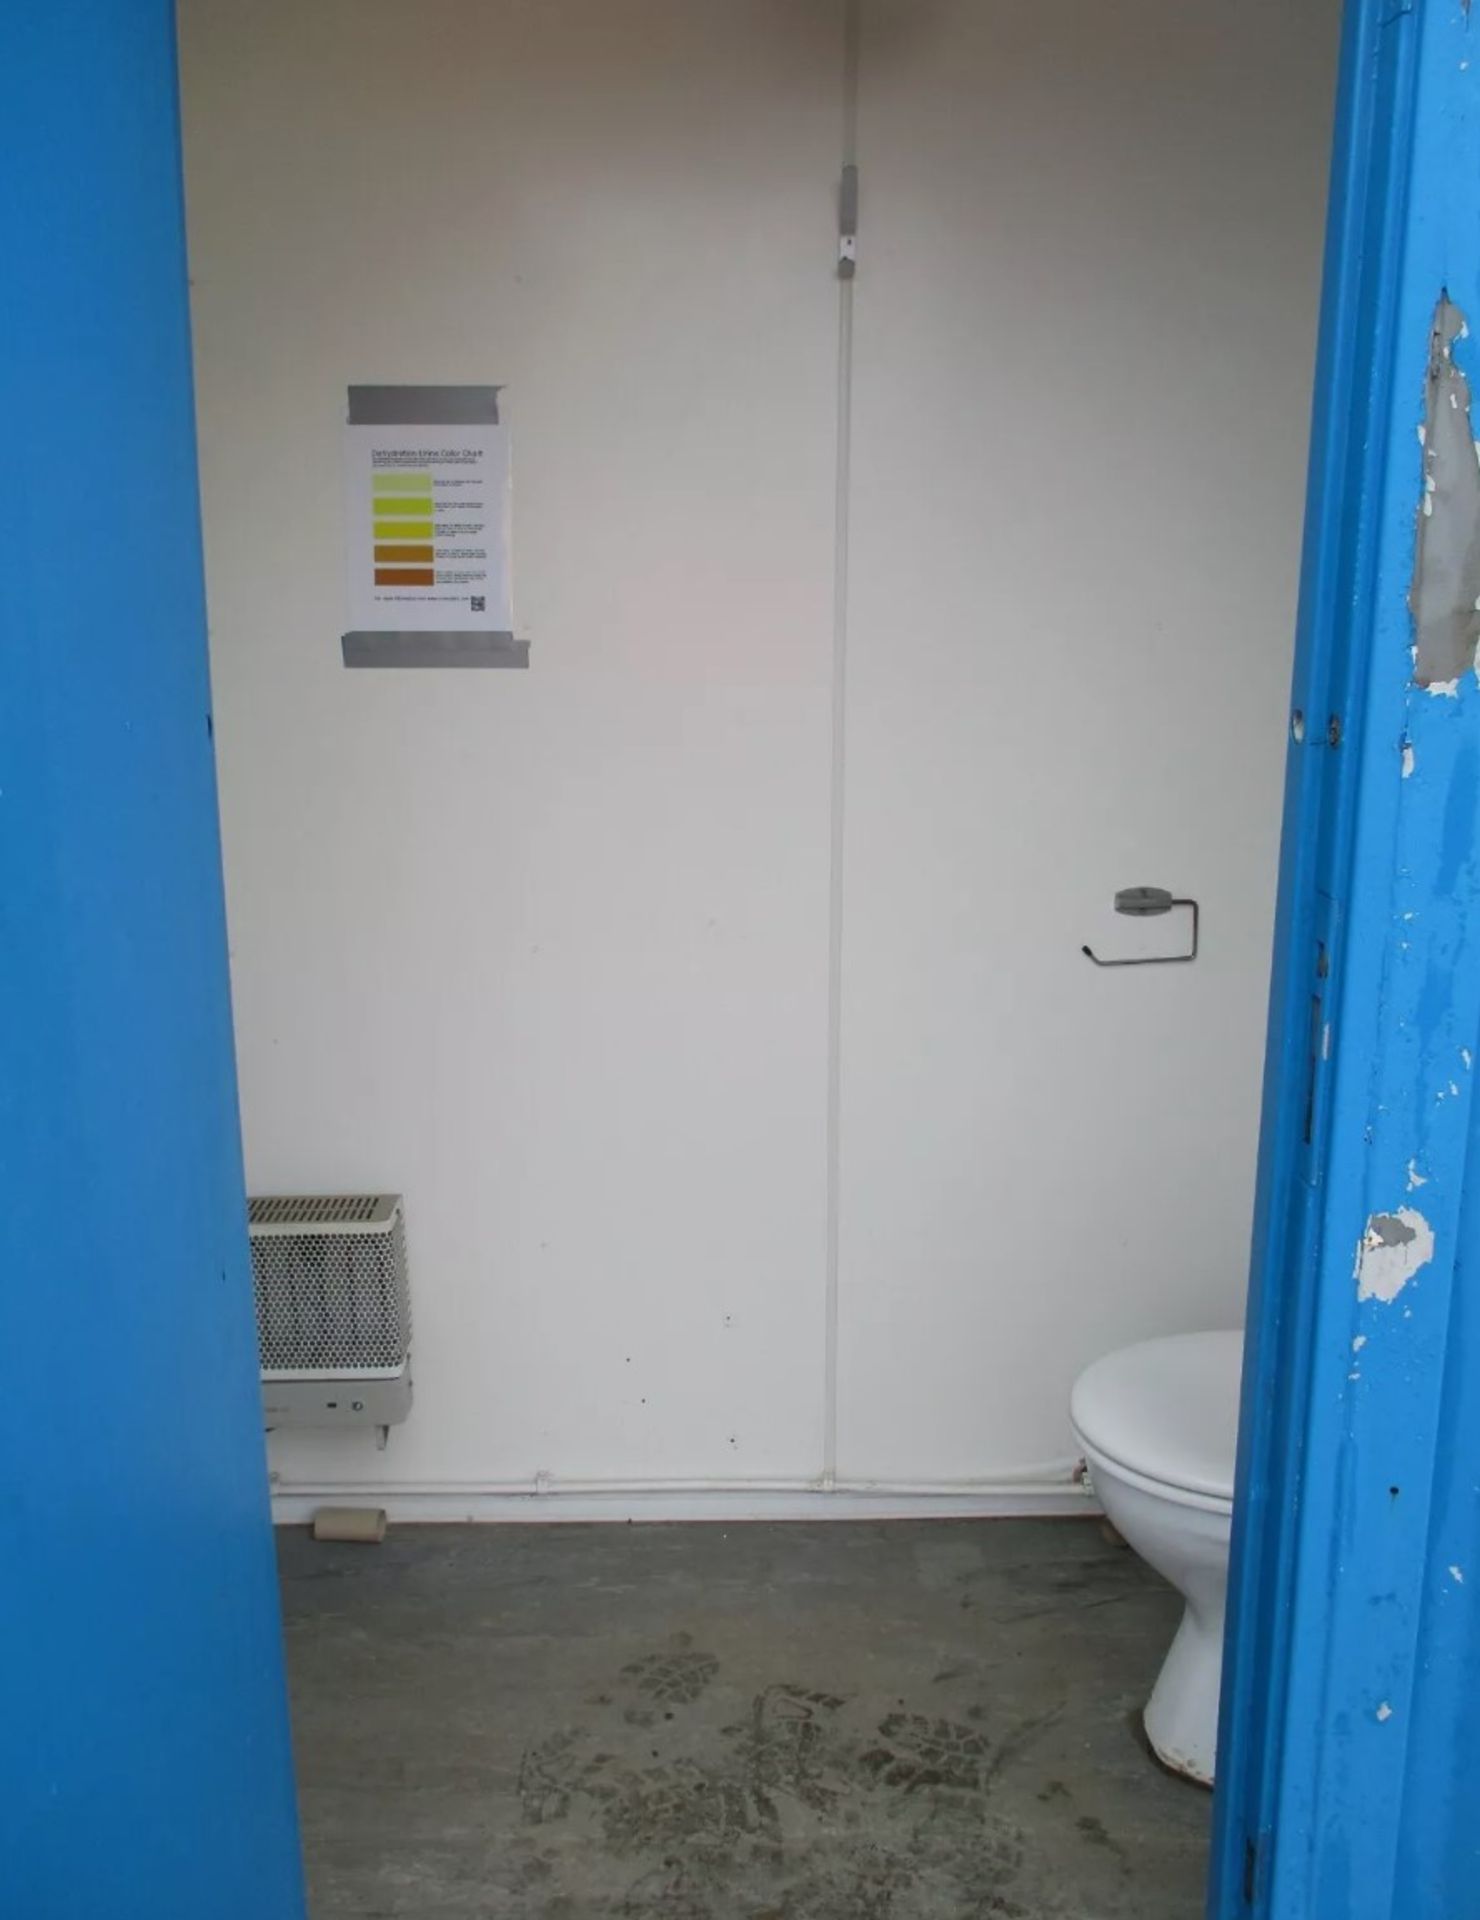 SHIPPING CONTAINER TOILET BLOCK: YOUR COMPLETE PORTABLE SANITATION SOLUTION - Image 8 of 11